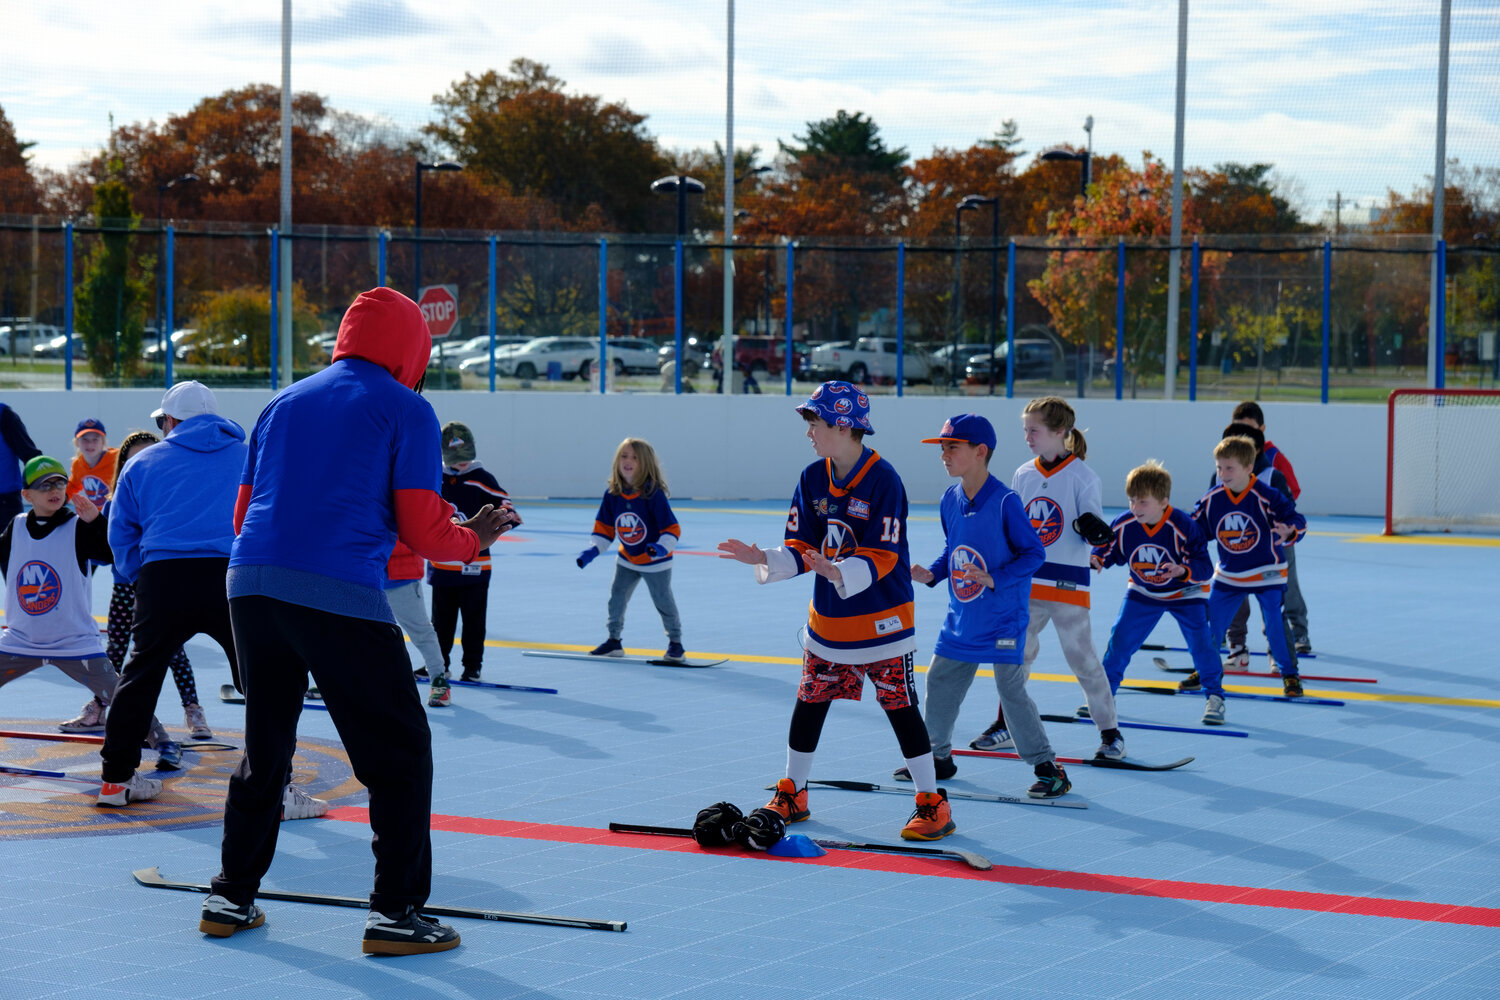 The community relations team led hockey players of all age and skill in different exorcises throughout the hour-long program.